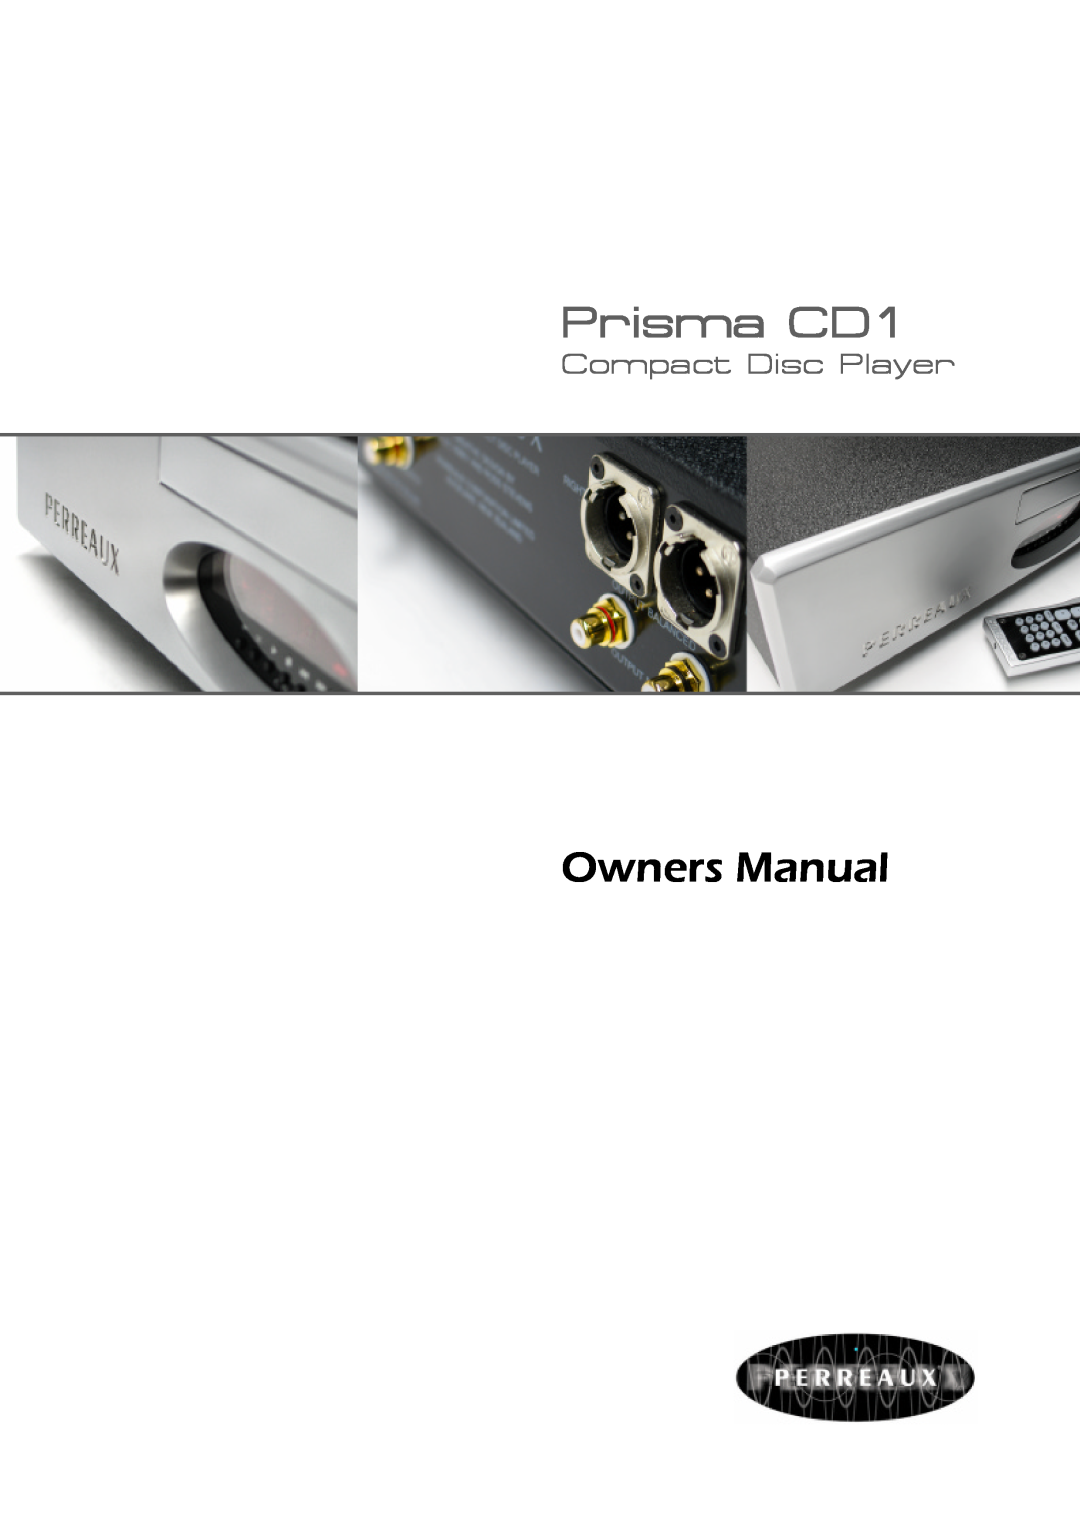 Perreaux CD Player owner manual Prisma CD1, Compact Disc Player 